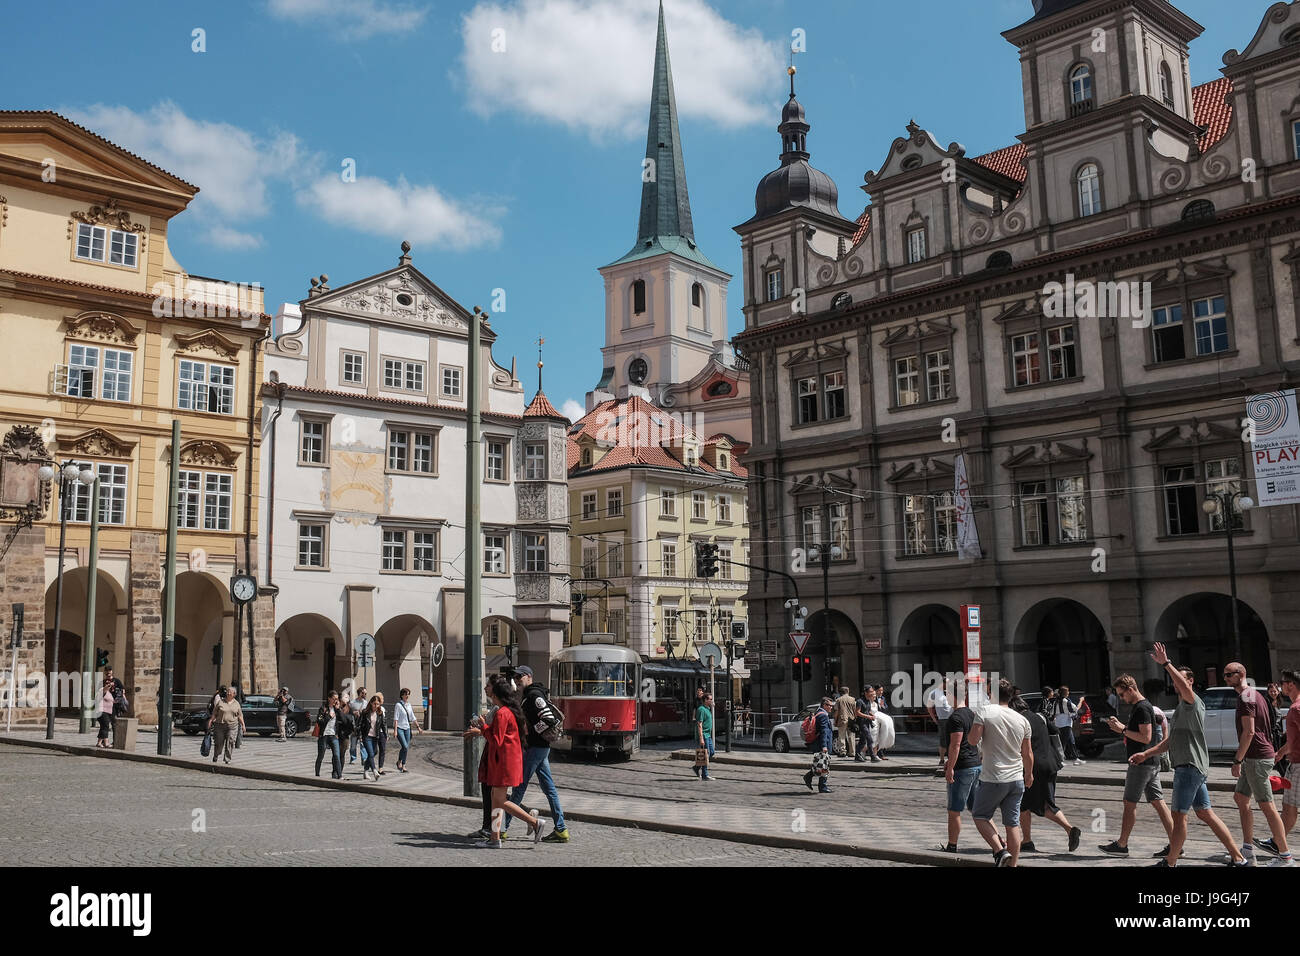 A view of streets in Mala Strana on the left, west, bank of the river Vltava, on the slopes just below the Prague Castle. Stock Photo